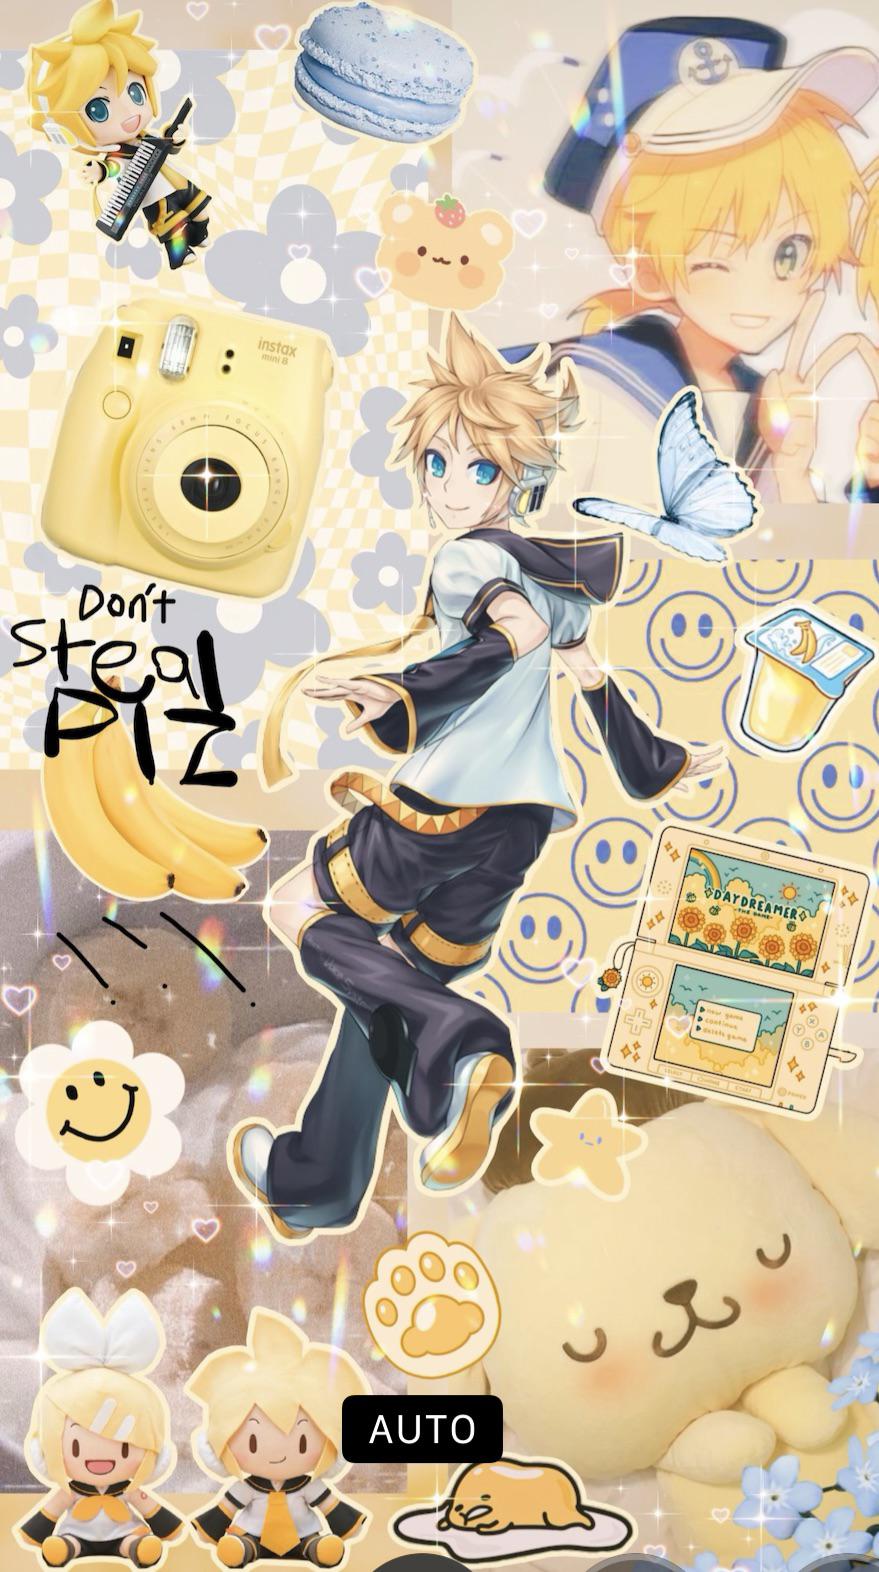 My brother made this really cool Len lockscreen for me (ignore the watermark and “Auto” thing at the bottom), but now I need cute app icons to match, can anyone give me